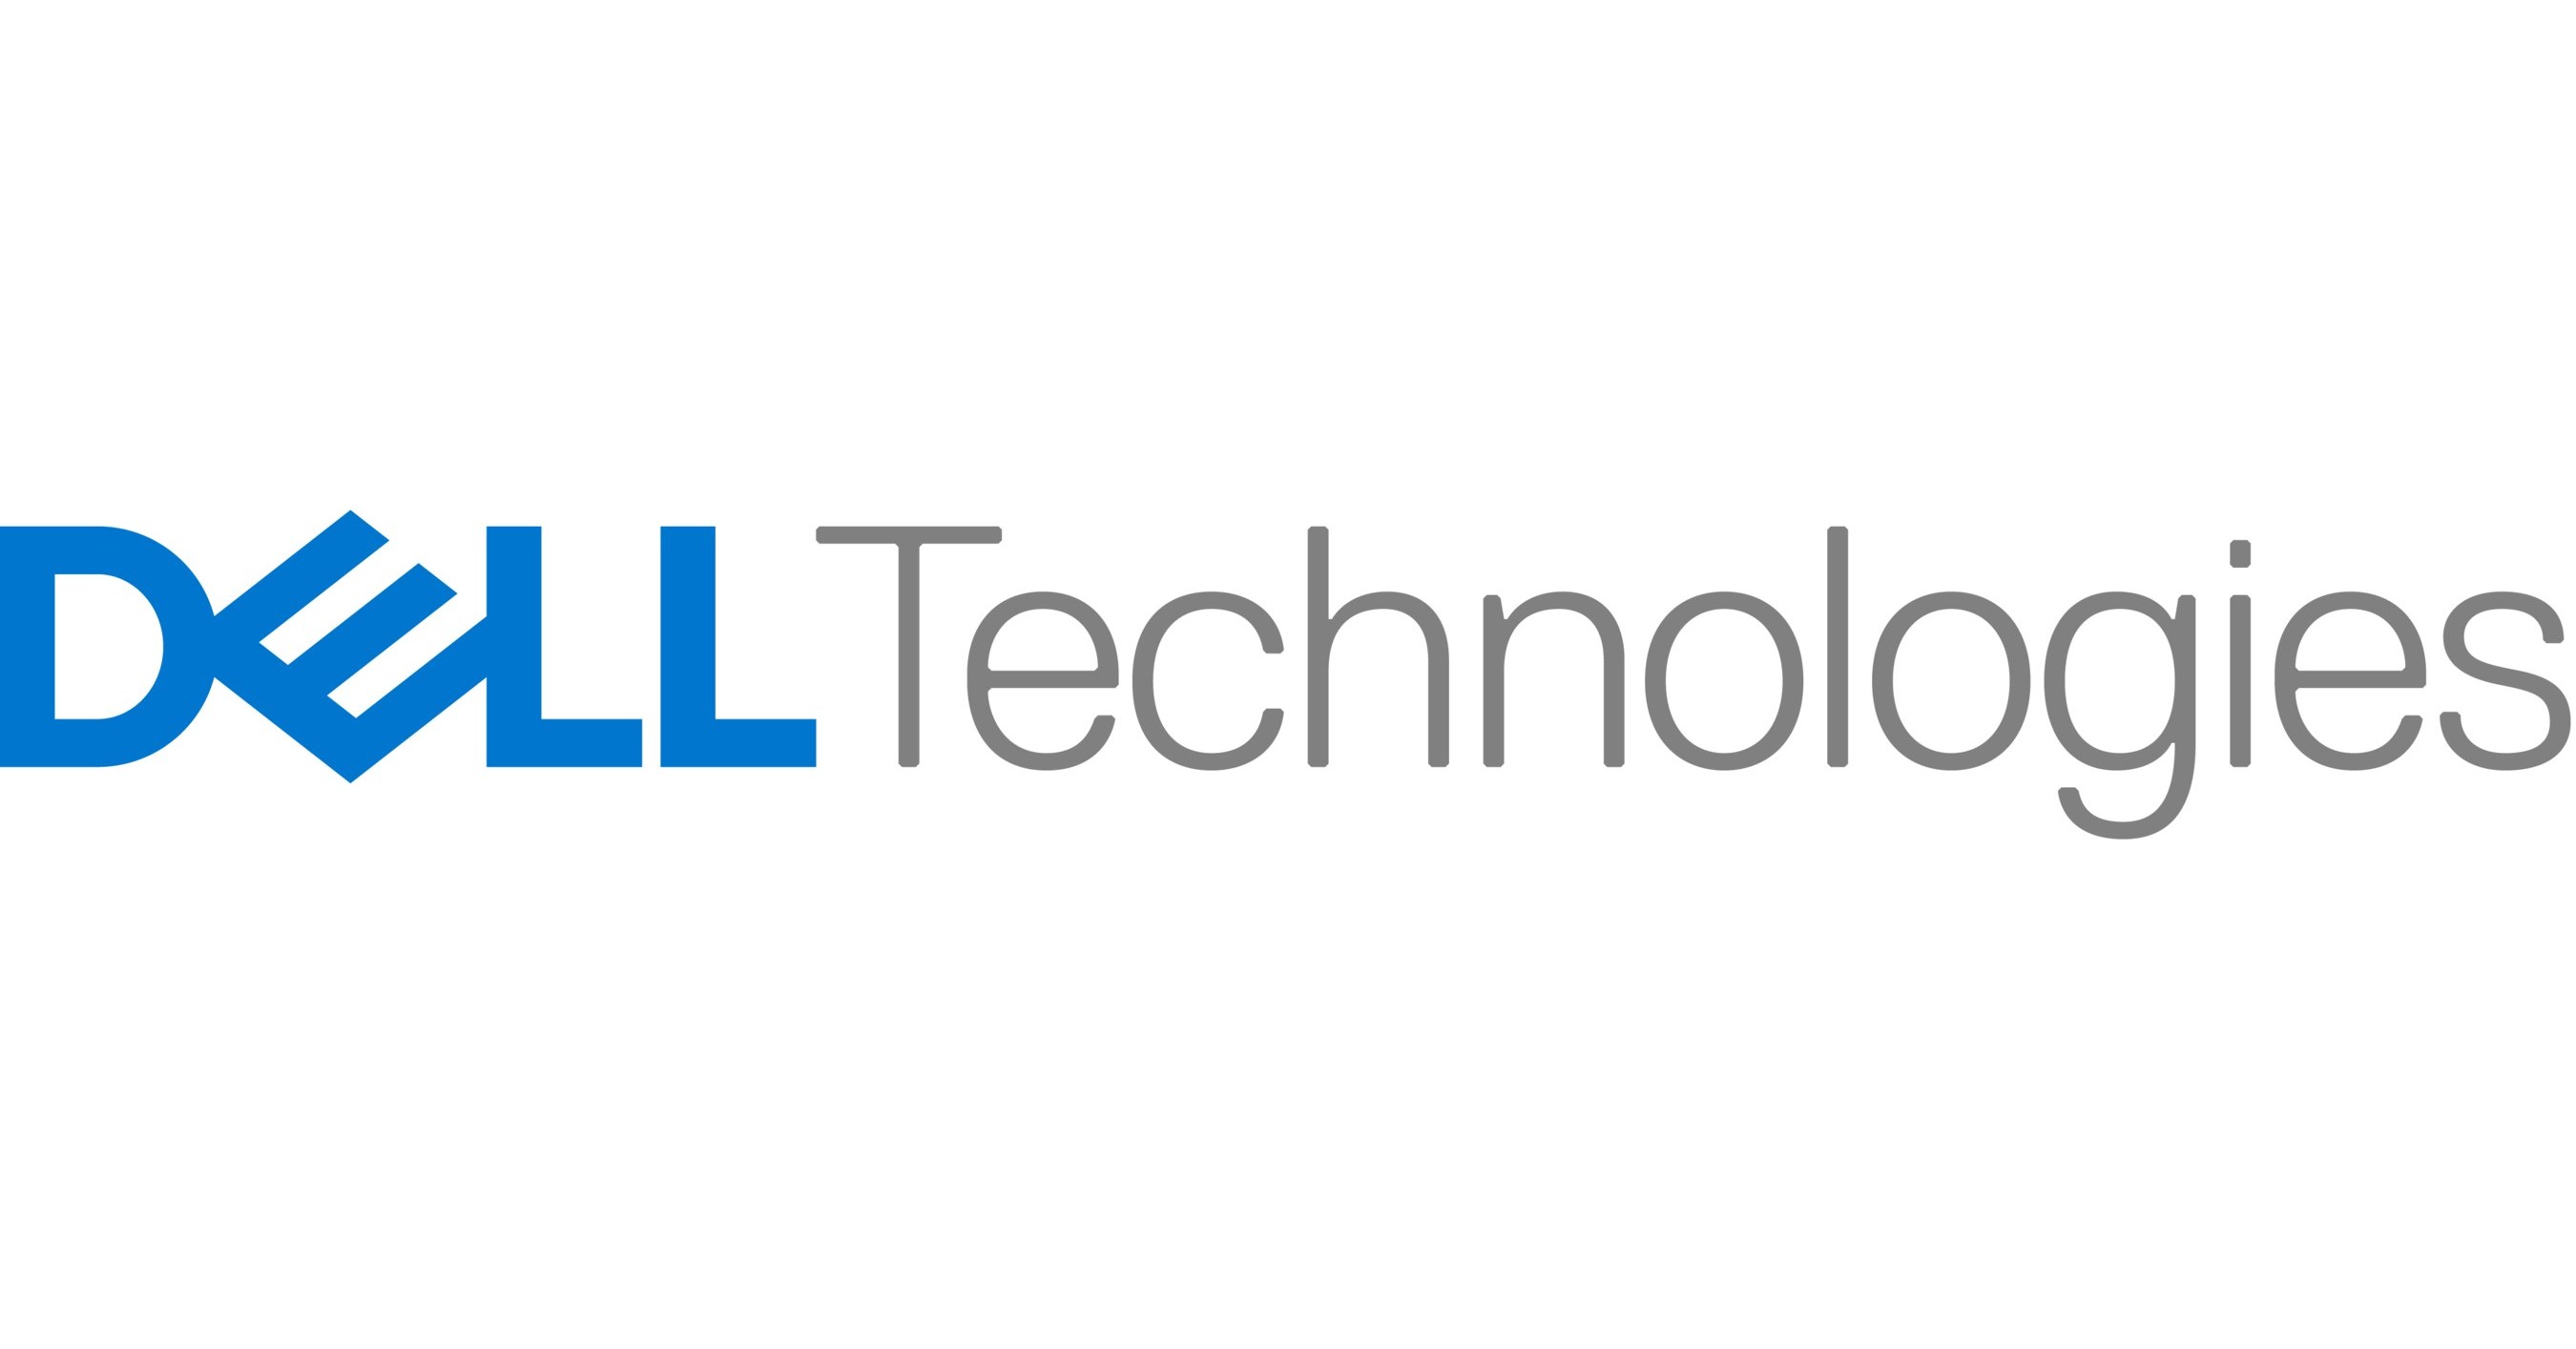 Dell Technologies Powers AI and Edge Computing with Next Generation